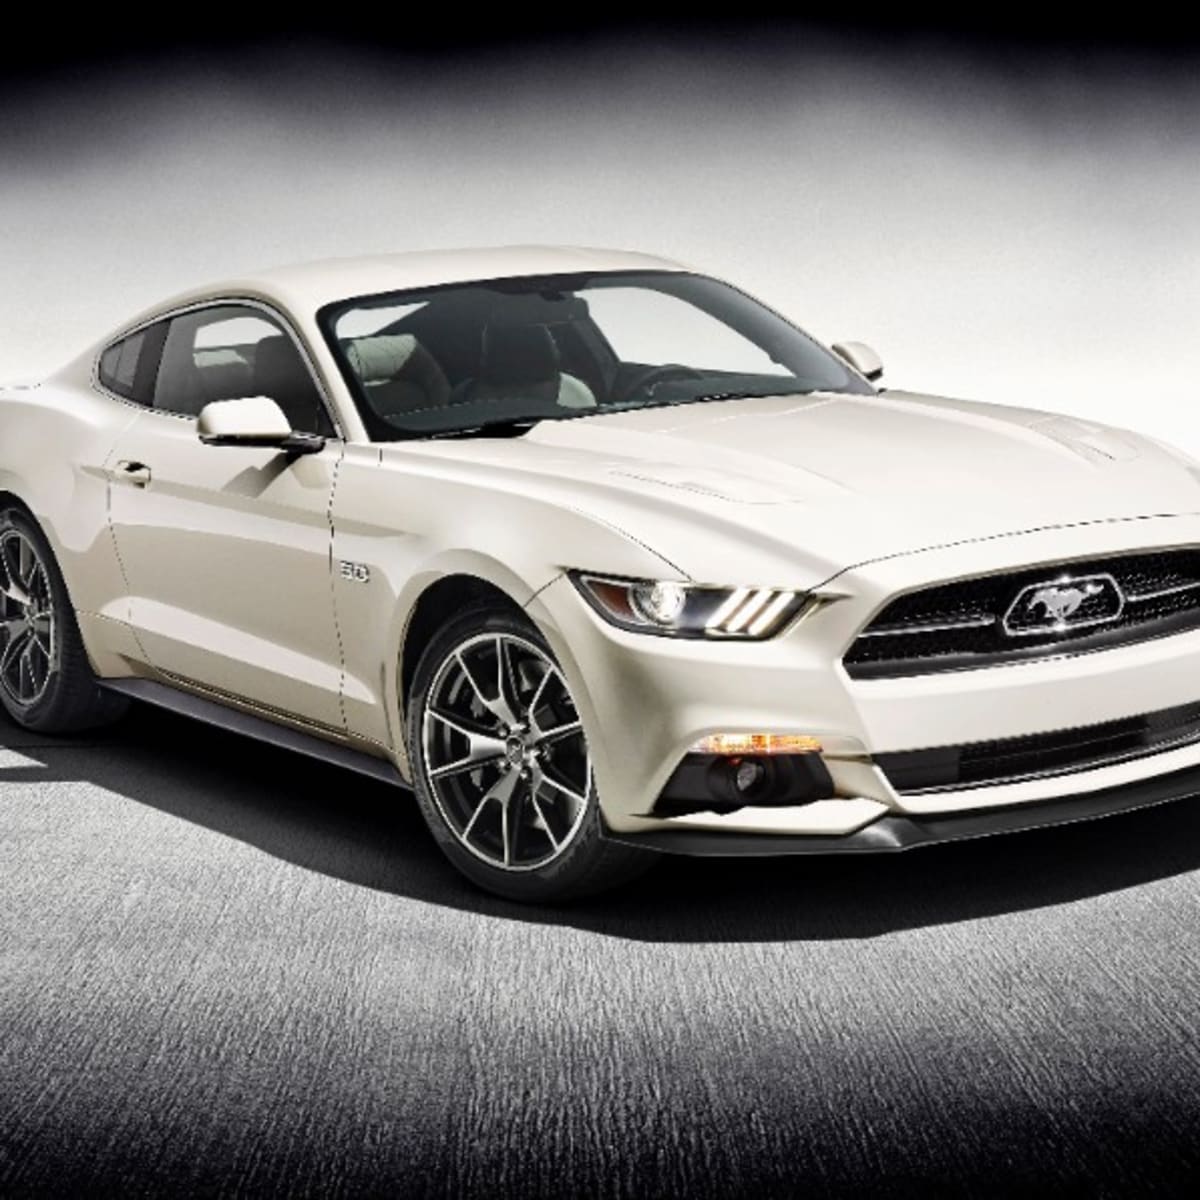 2015 Ford Mustang 50th Anniversary Edition Caradvice